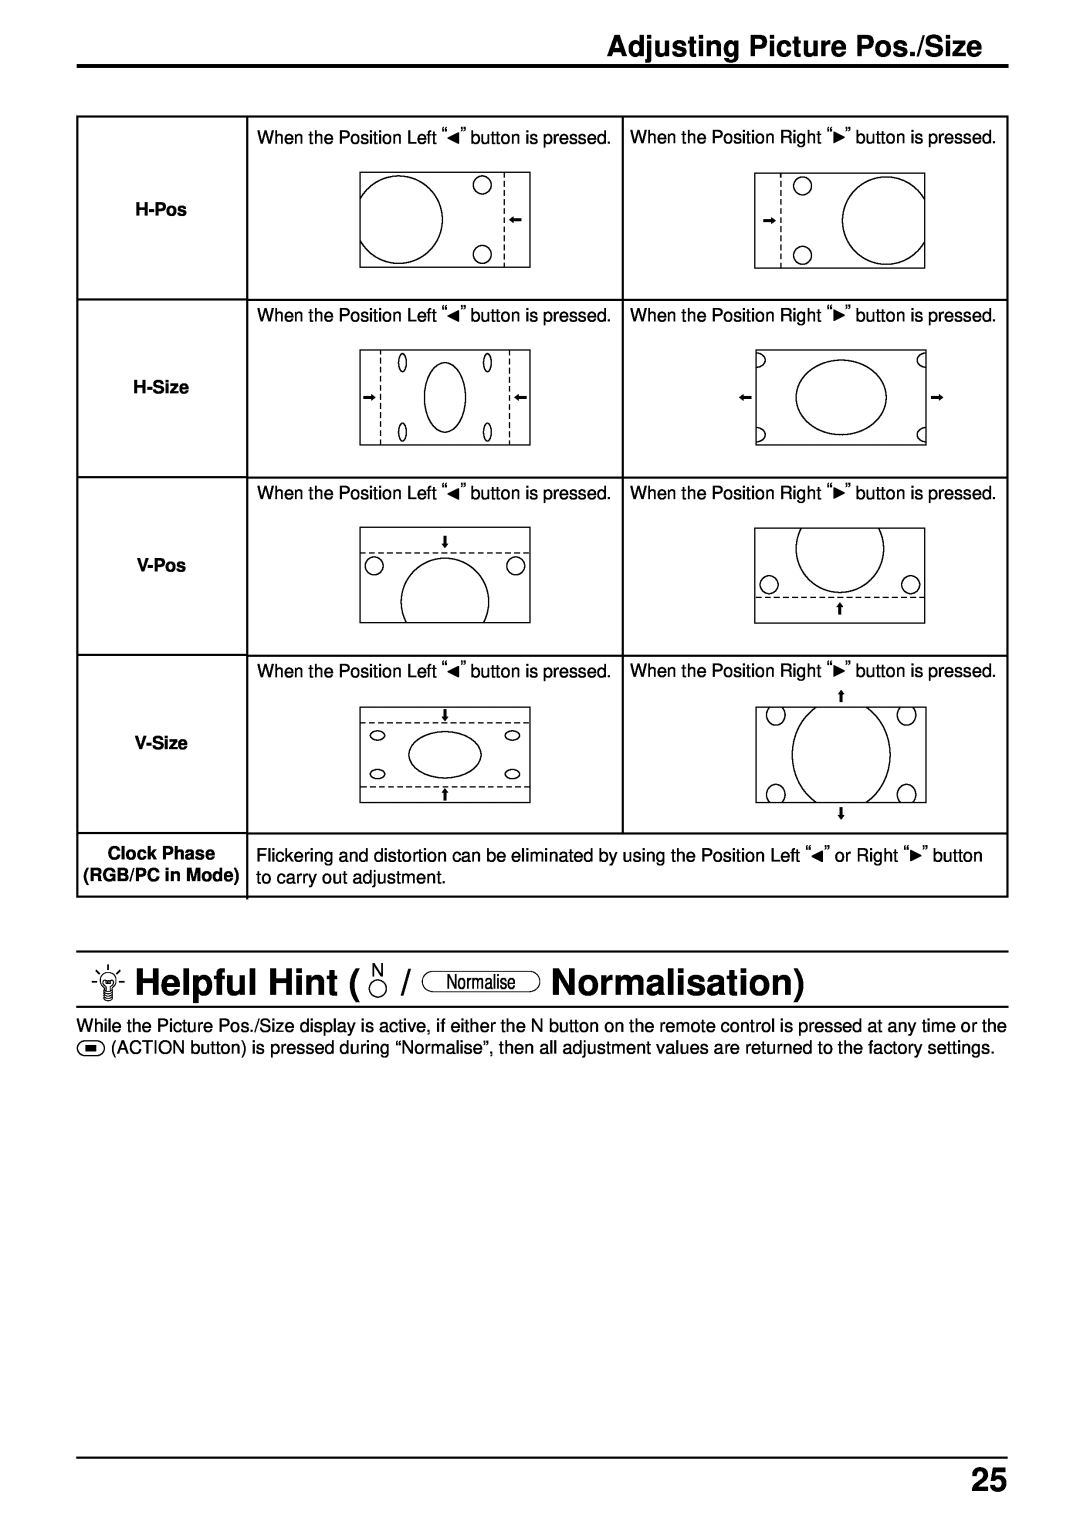 Panasonic TH-42PHW5, TH-50PHW5 manual Helpful Hint N / Normalise Normalisation, Adjusting Picture Pos./Size 